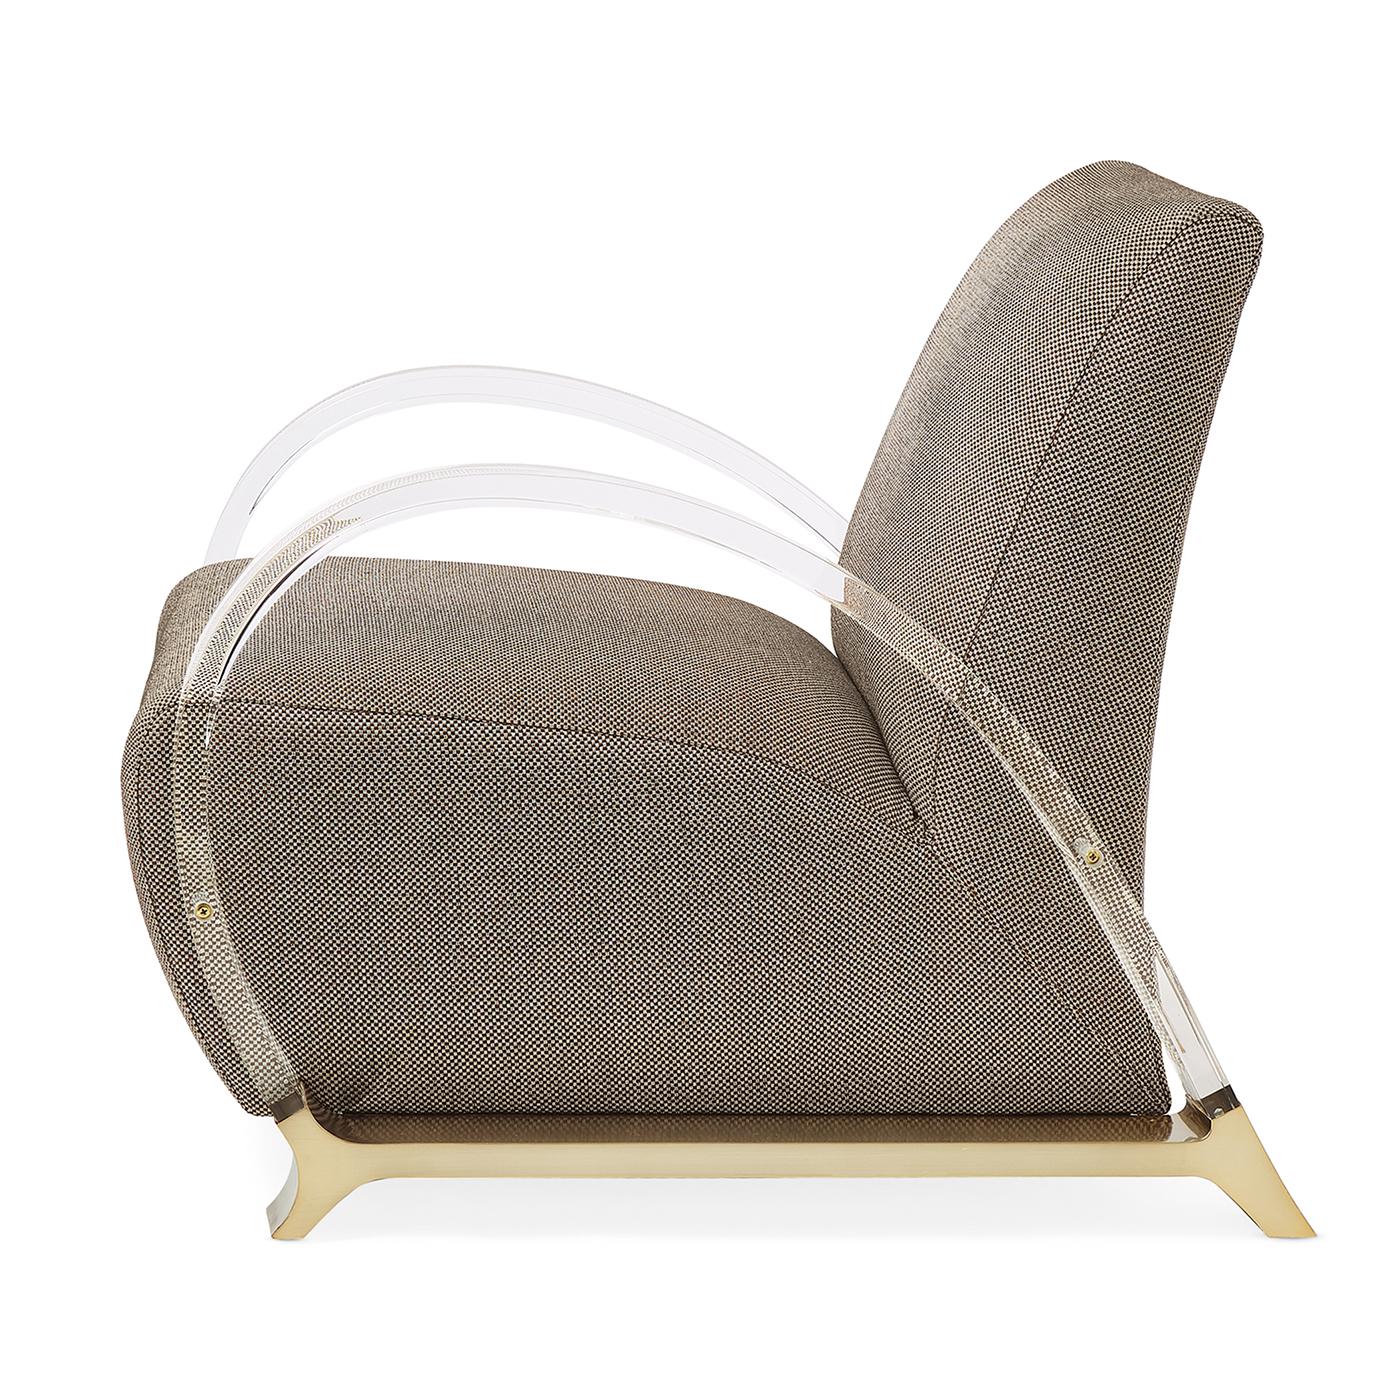 Broches modern armchair. A French style standout, it features shapely arms crafted of clear acrylic and reminiscent of a chic roadster. Expertly tailored upholstery in a basketweave fabric, features soft shades of bittersweet chocolate and